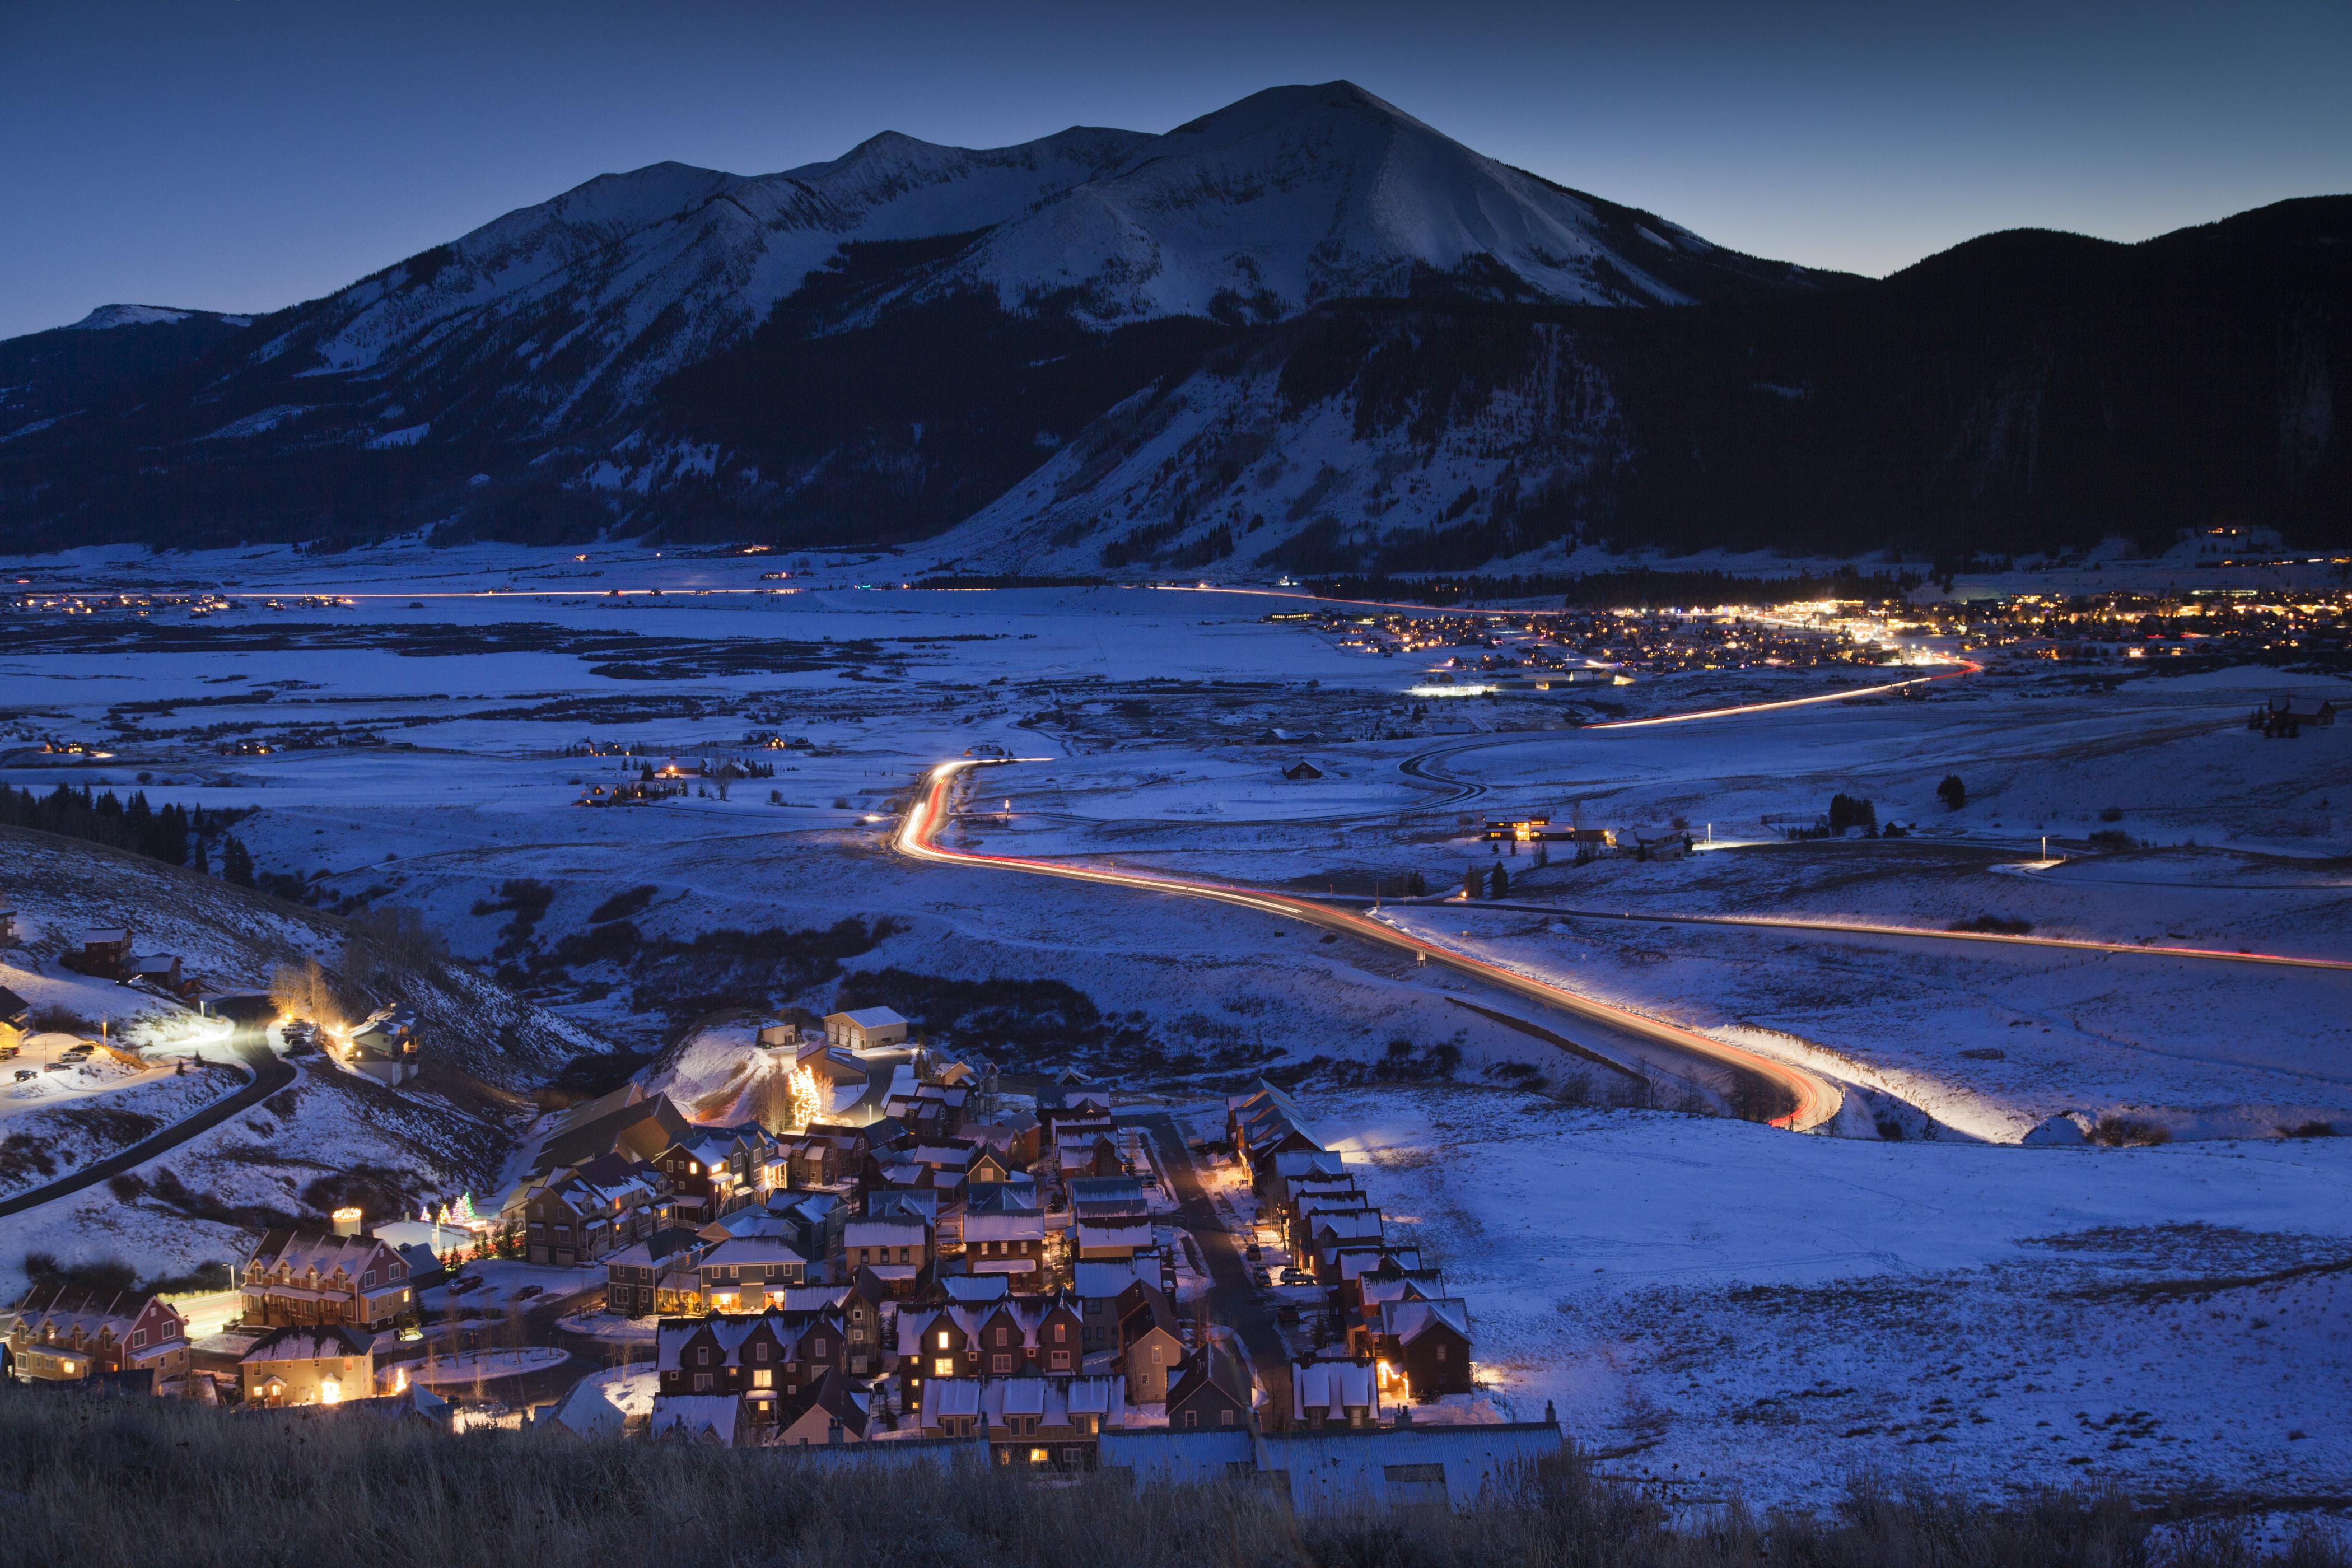 Winter evening glow in Crested Butte